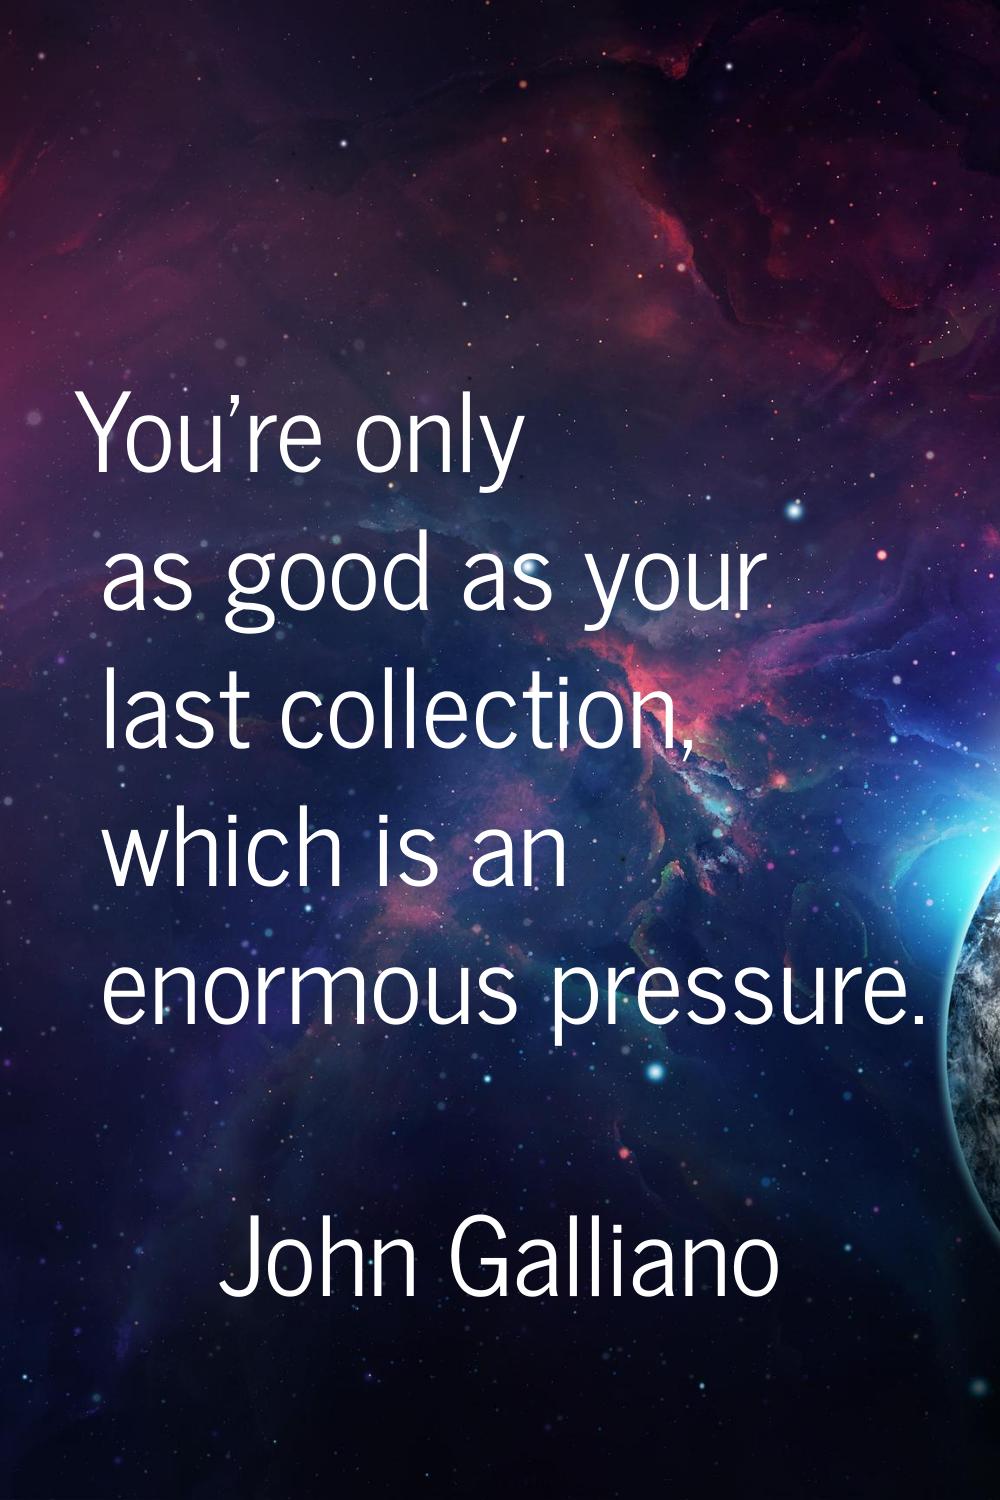 You're only as good as your last collection, which is an enormous pressure.